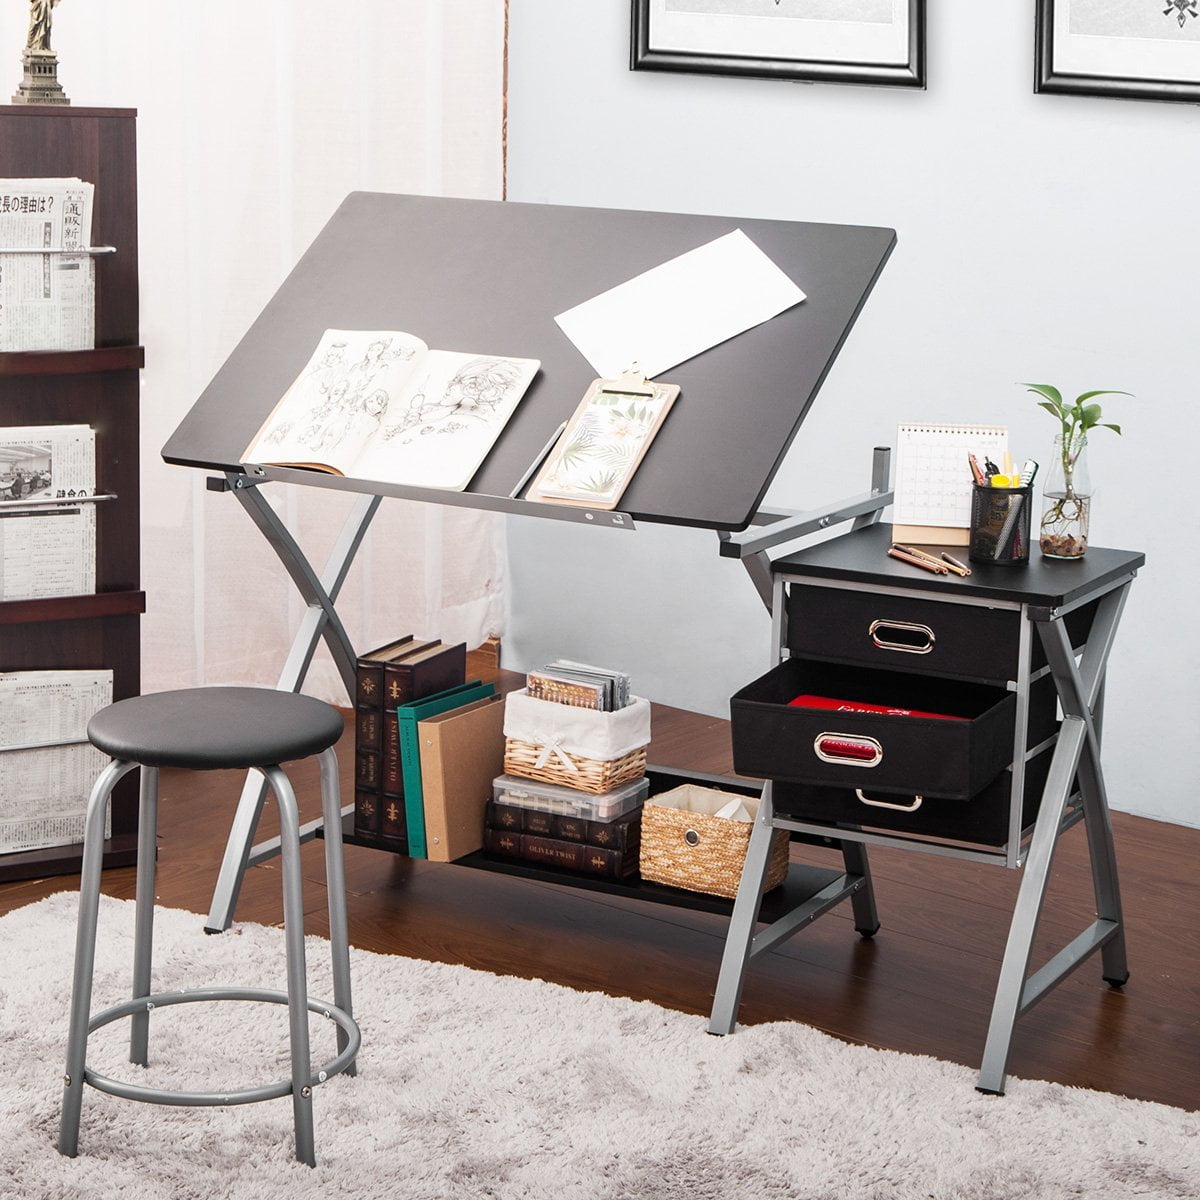 Harper&Bright Designs Folding Drafting Table Drawing Desk with Drawers ...